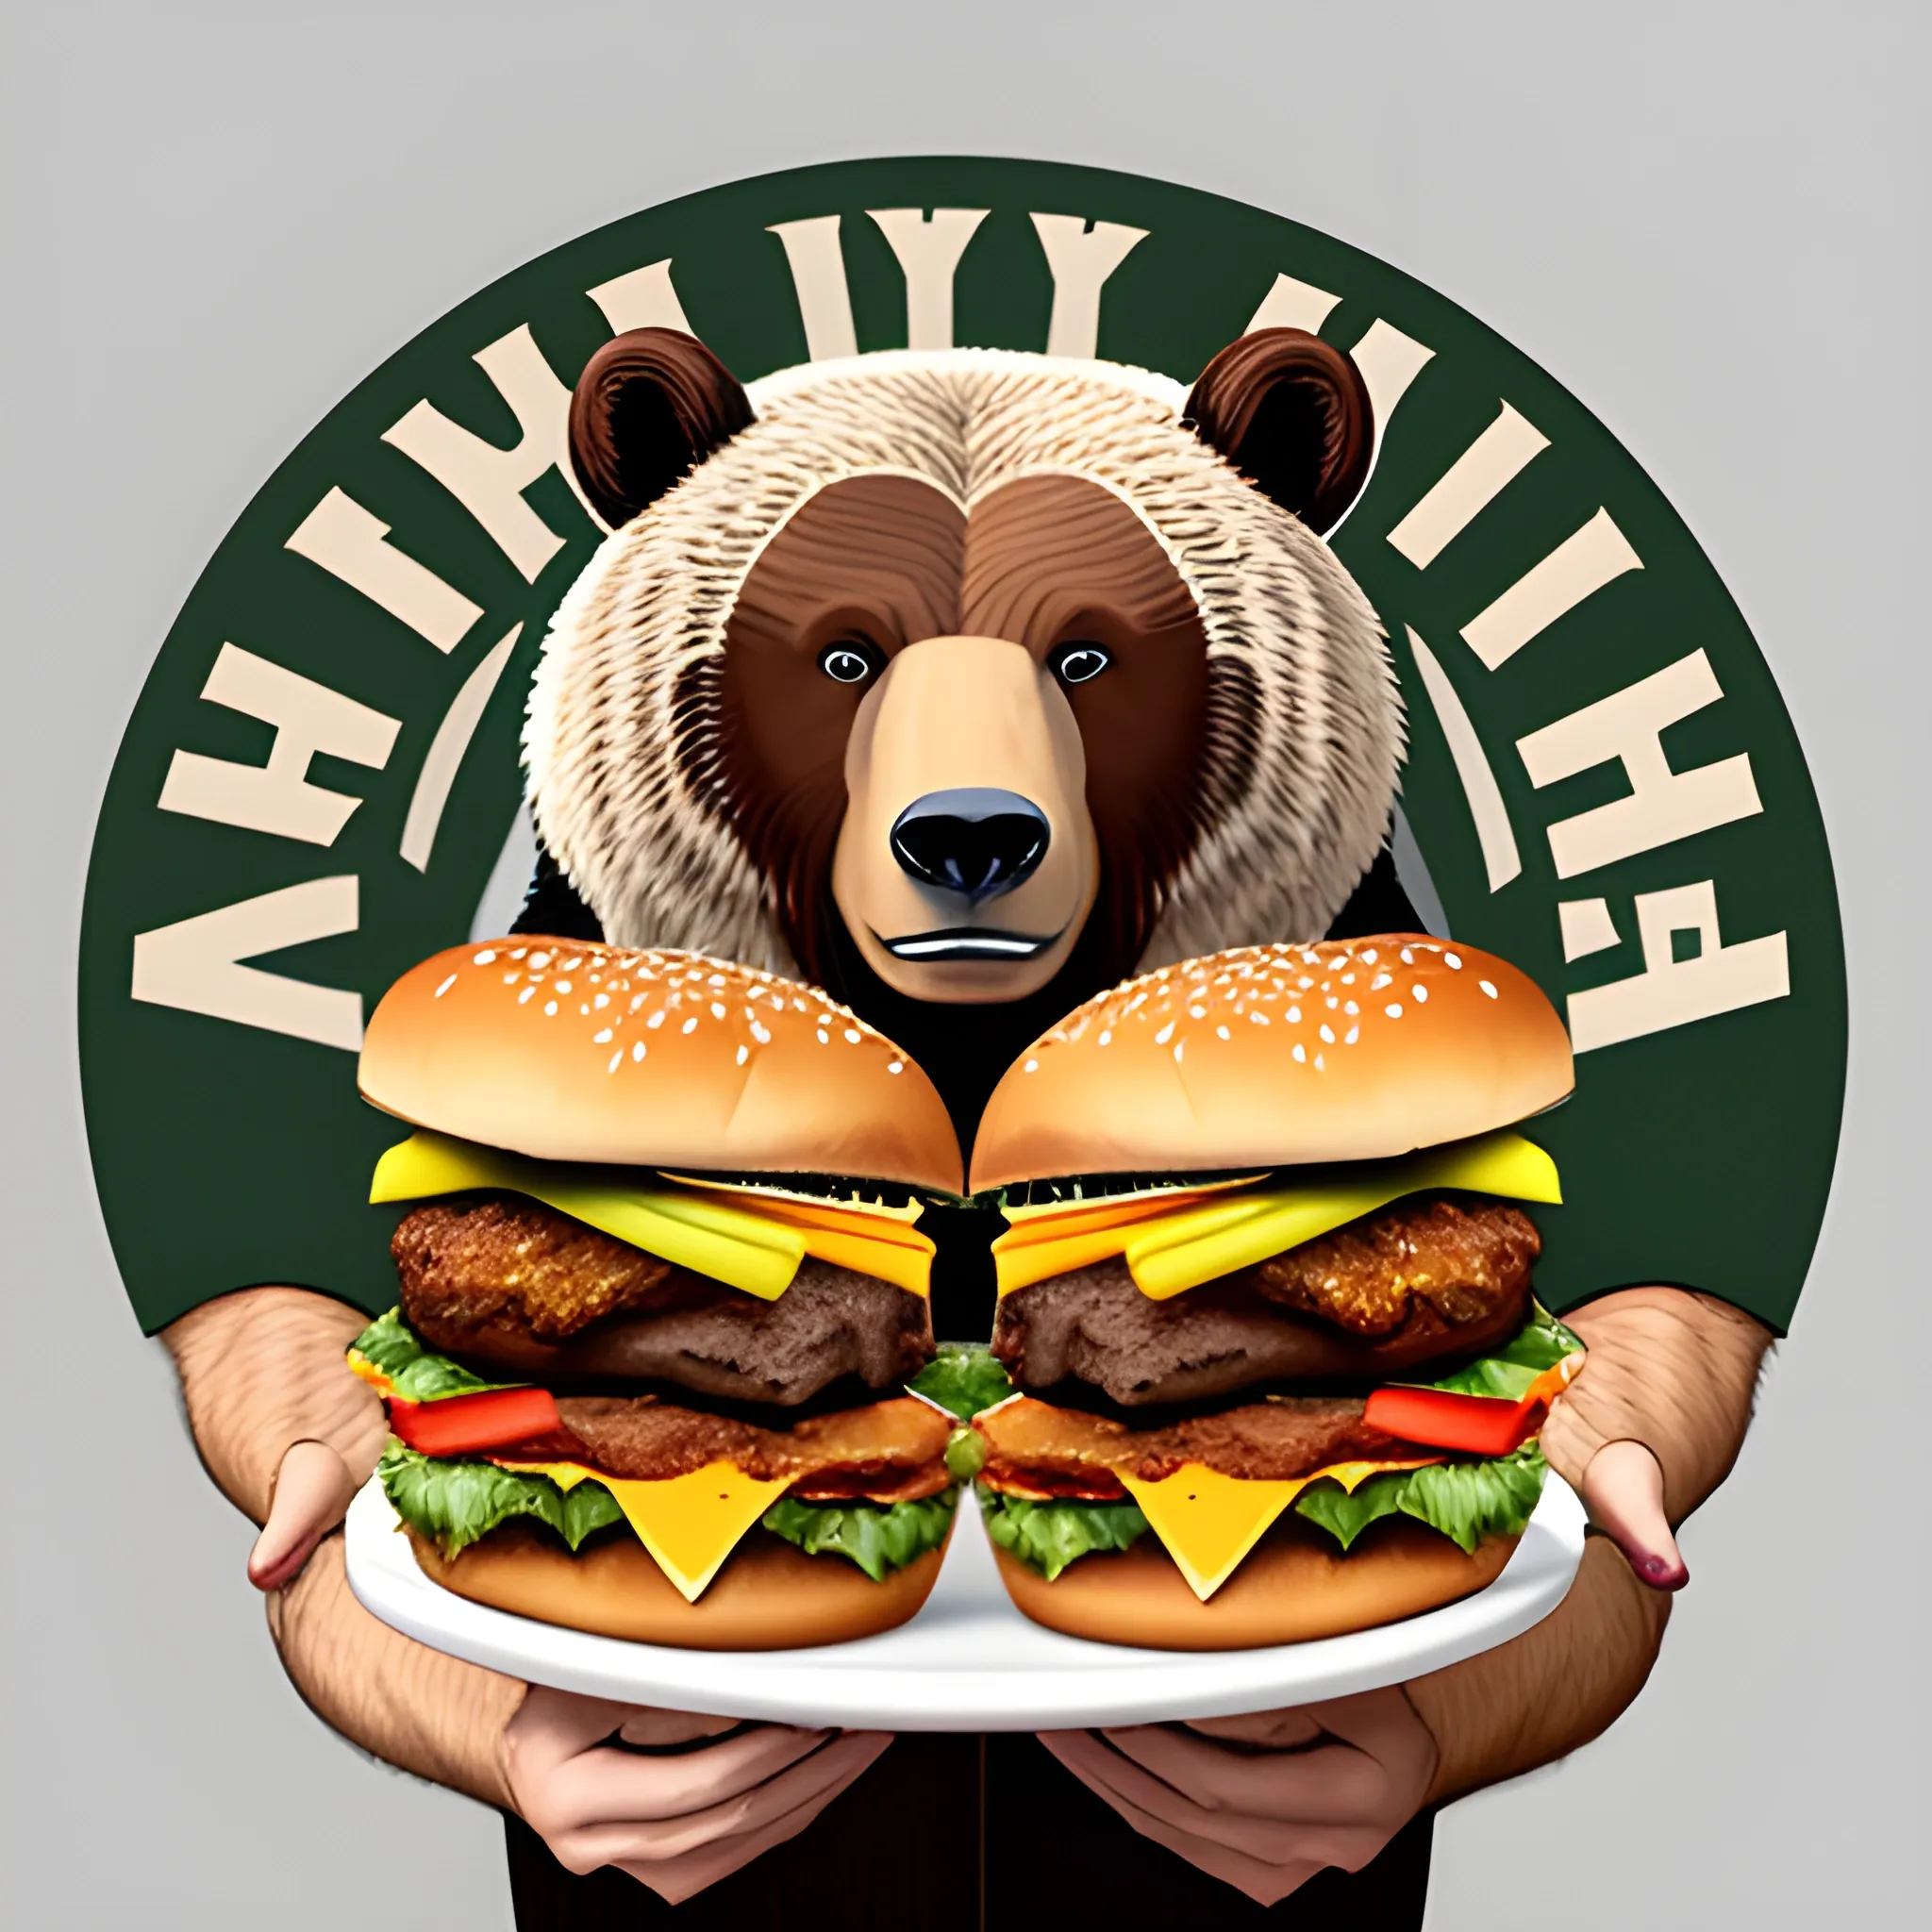 grizzly bear baby holding a burger logo style